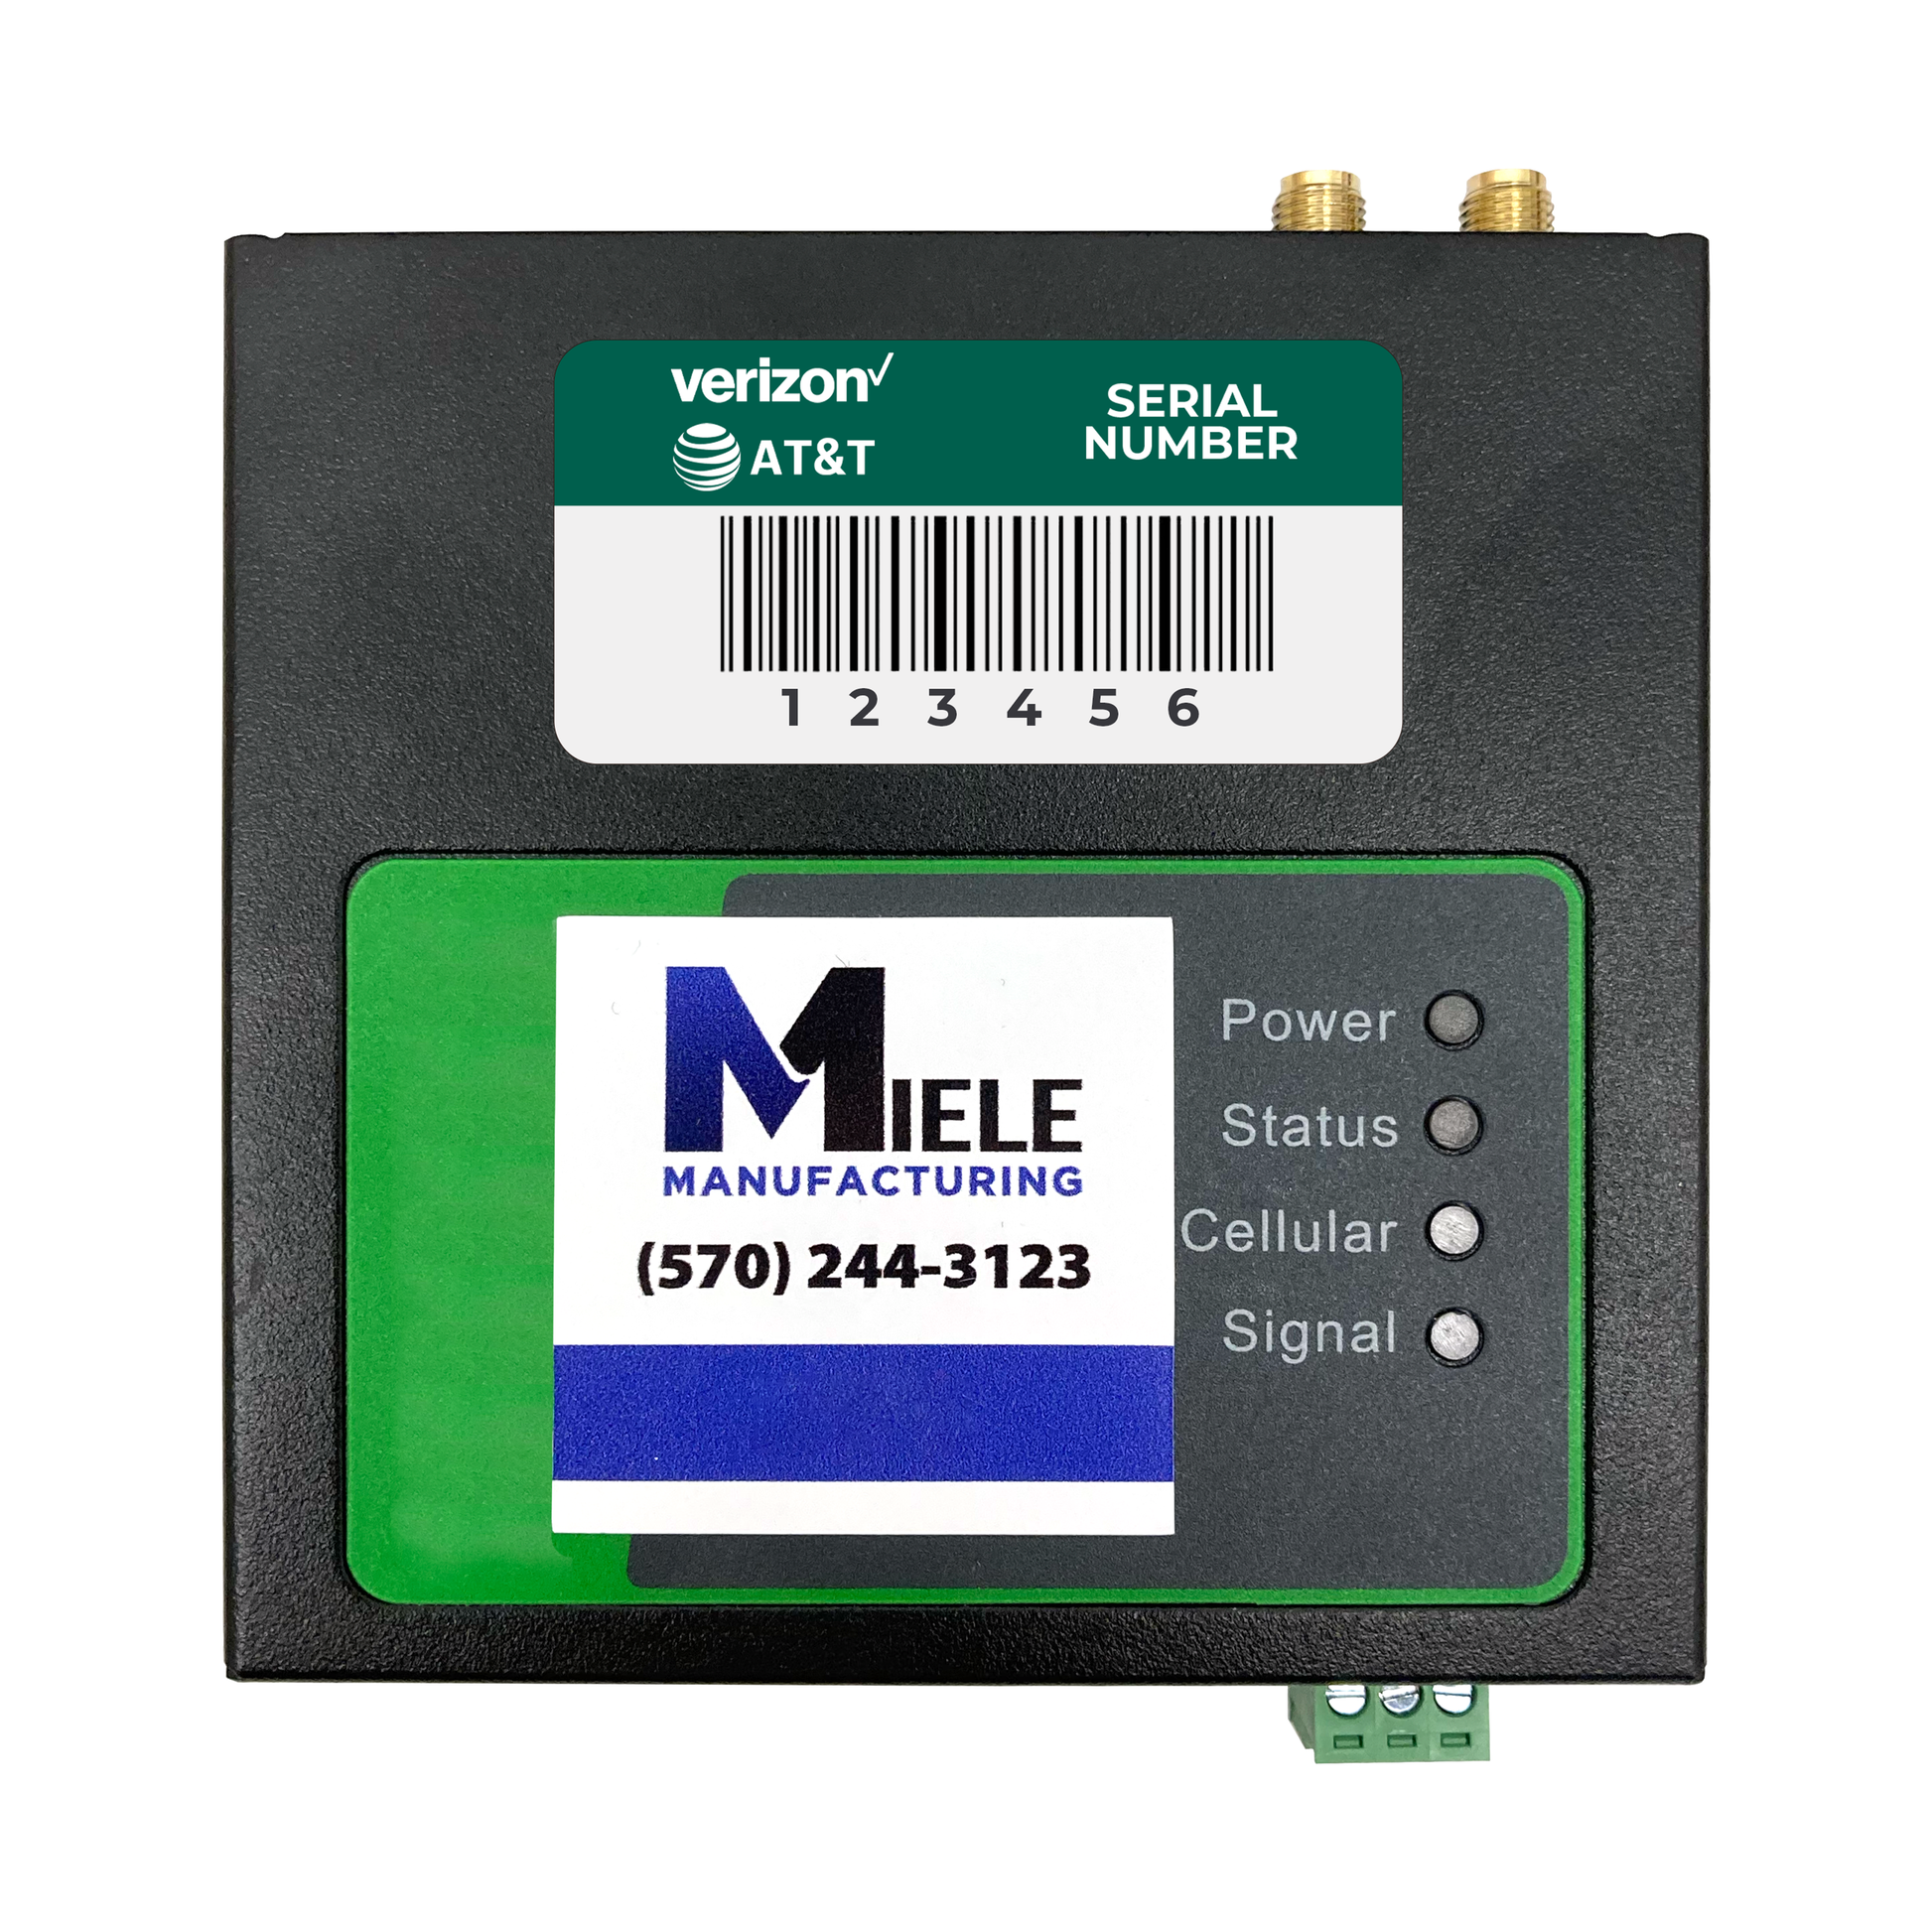 M 22 Wireless Connectivity Device. Miele Manufacturing’s wireless plan connects you to your locations with the nation’s leading carriers, Verizon and AT&T, allowing you to pay only for the data used. With no contract required, you can suspend your data plan at any time.